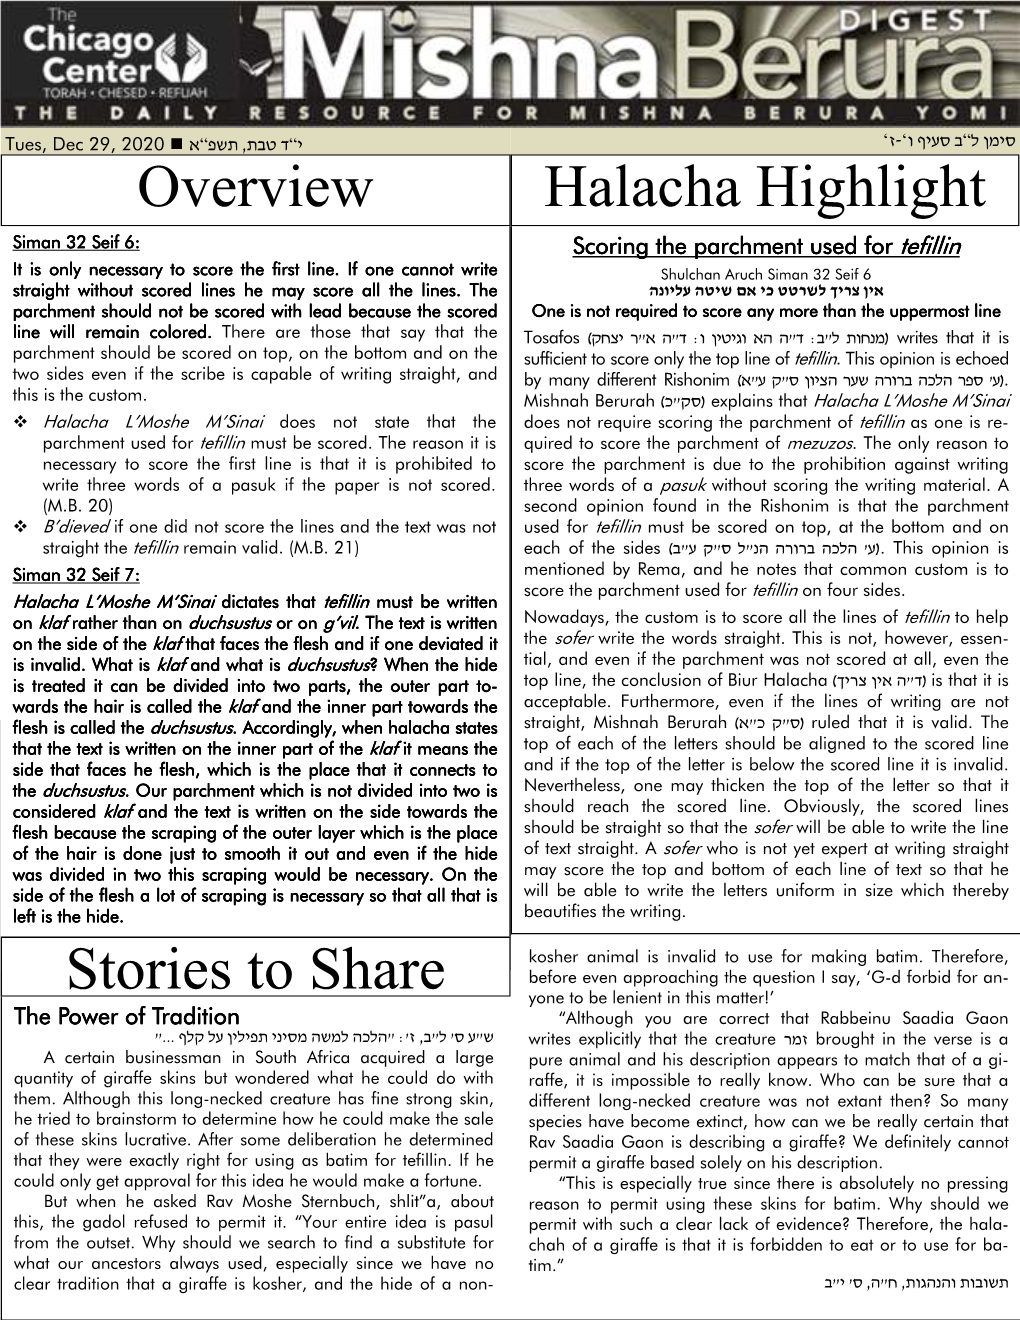 Overview Halacha Highlight Stories to Share